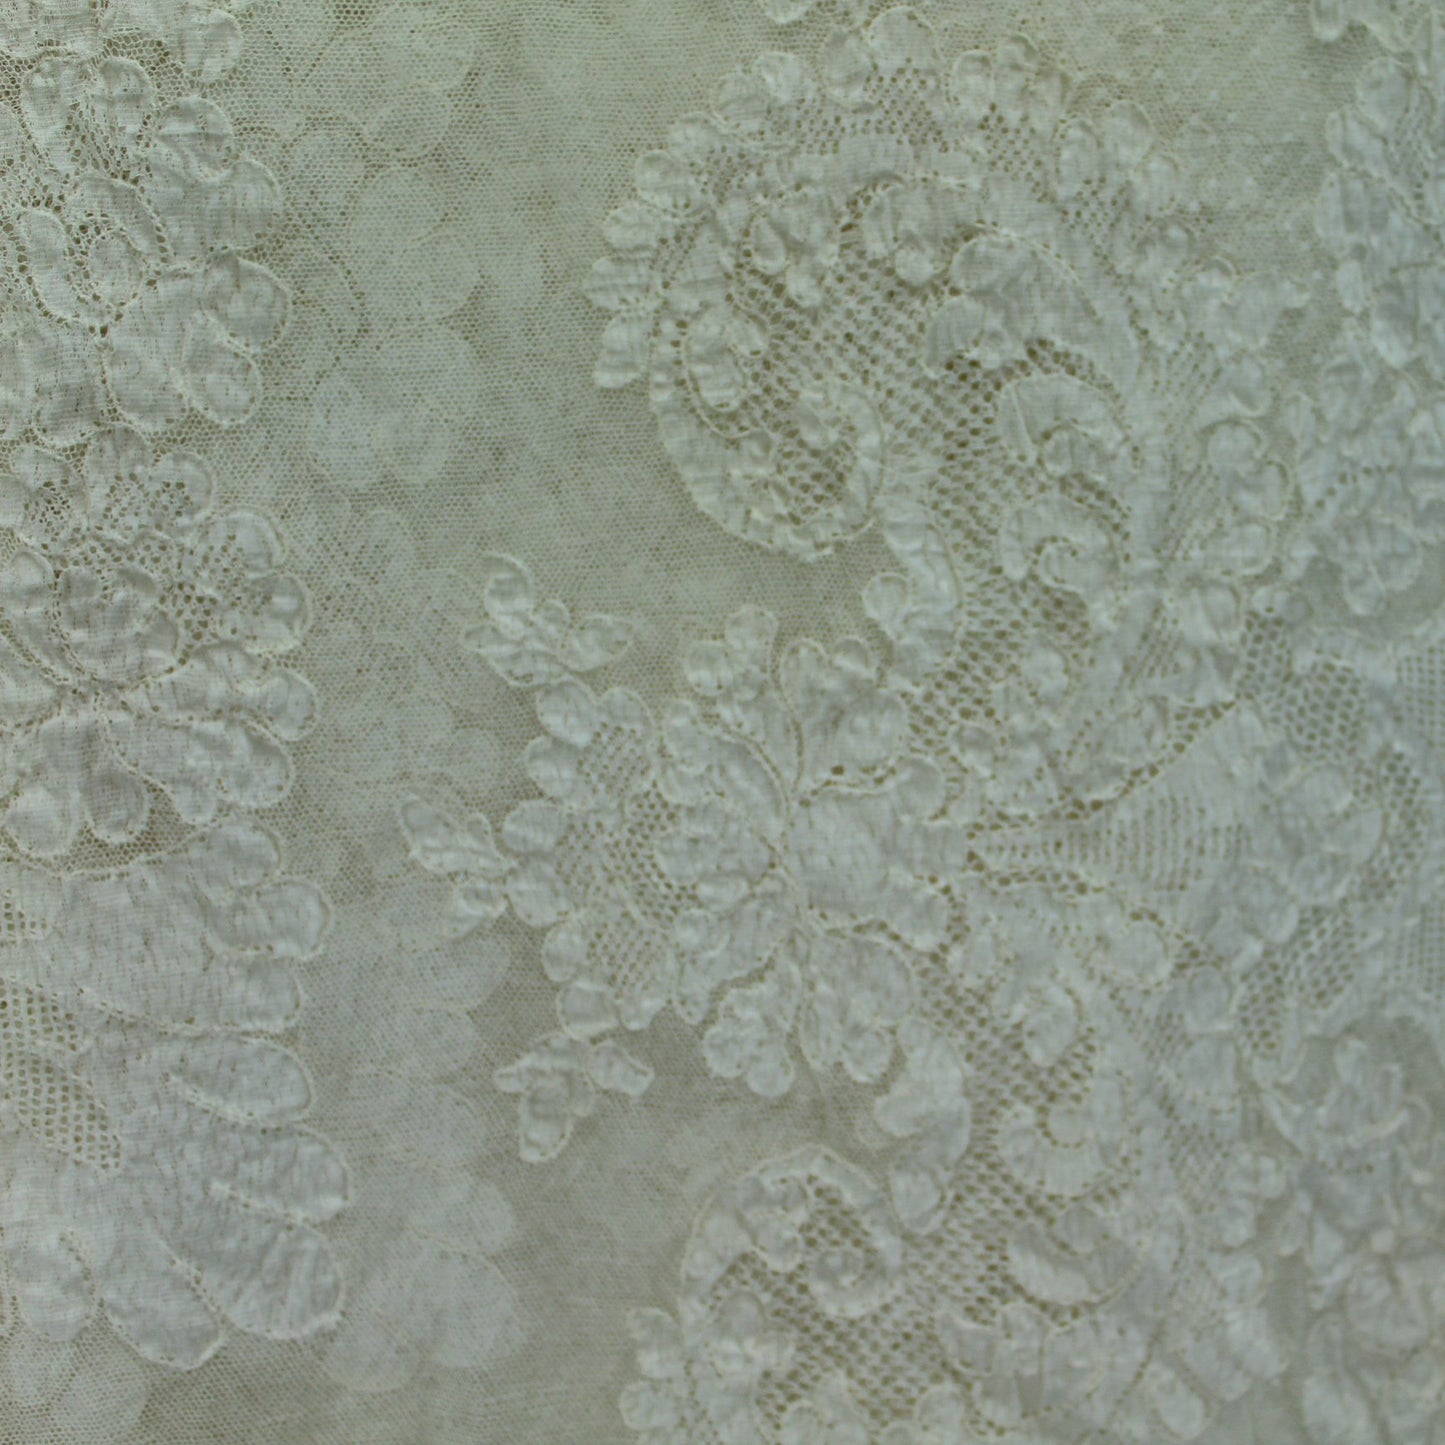 Alencon Cream Lace Tablecloth France Made for Marshall Field Exquisite closeup